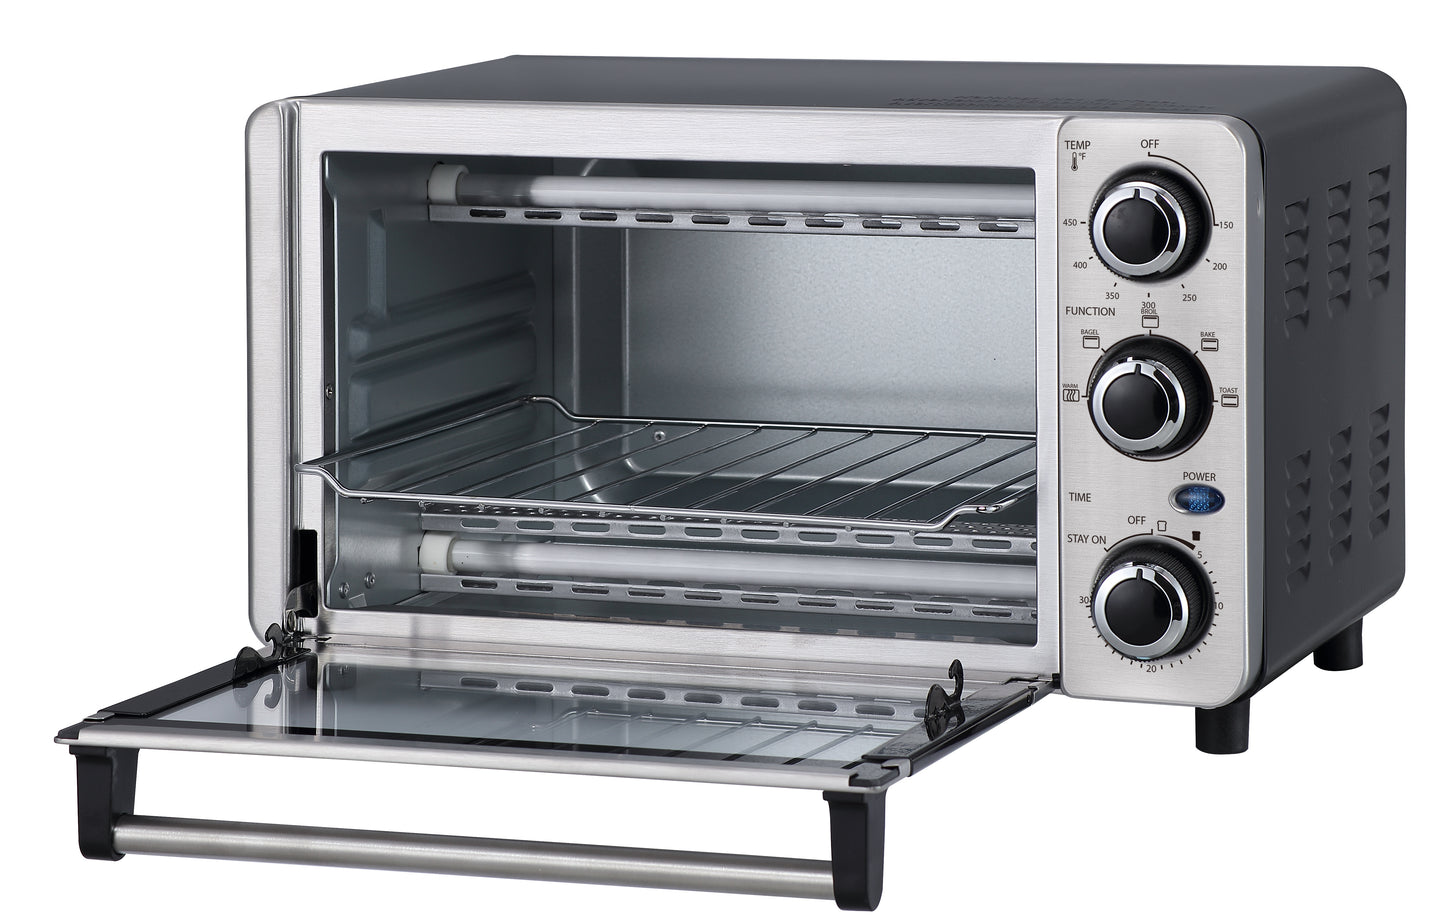 Danby Stainless Steel 0.4 cu ft 4 Slice Countertop Toaster Oven